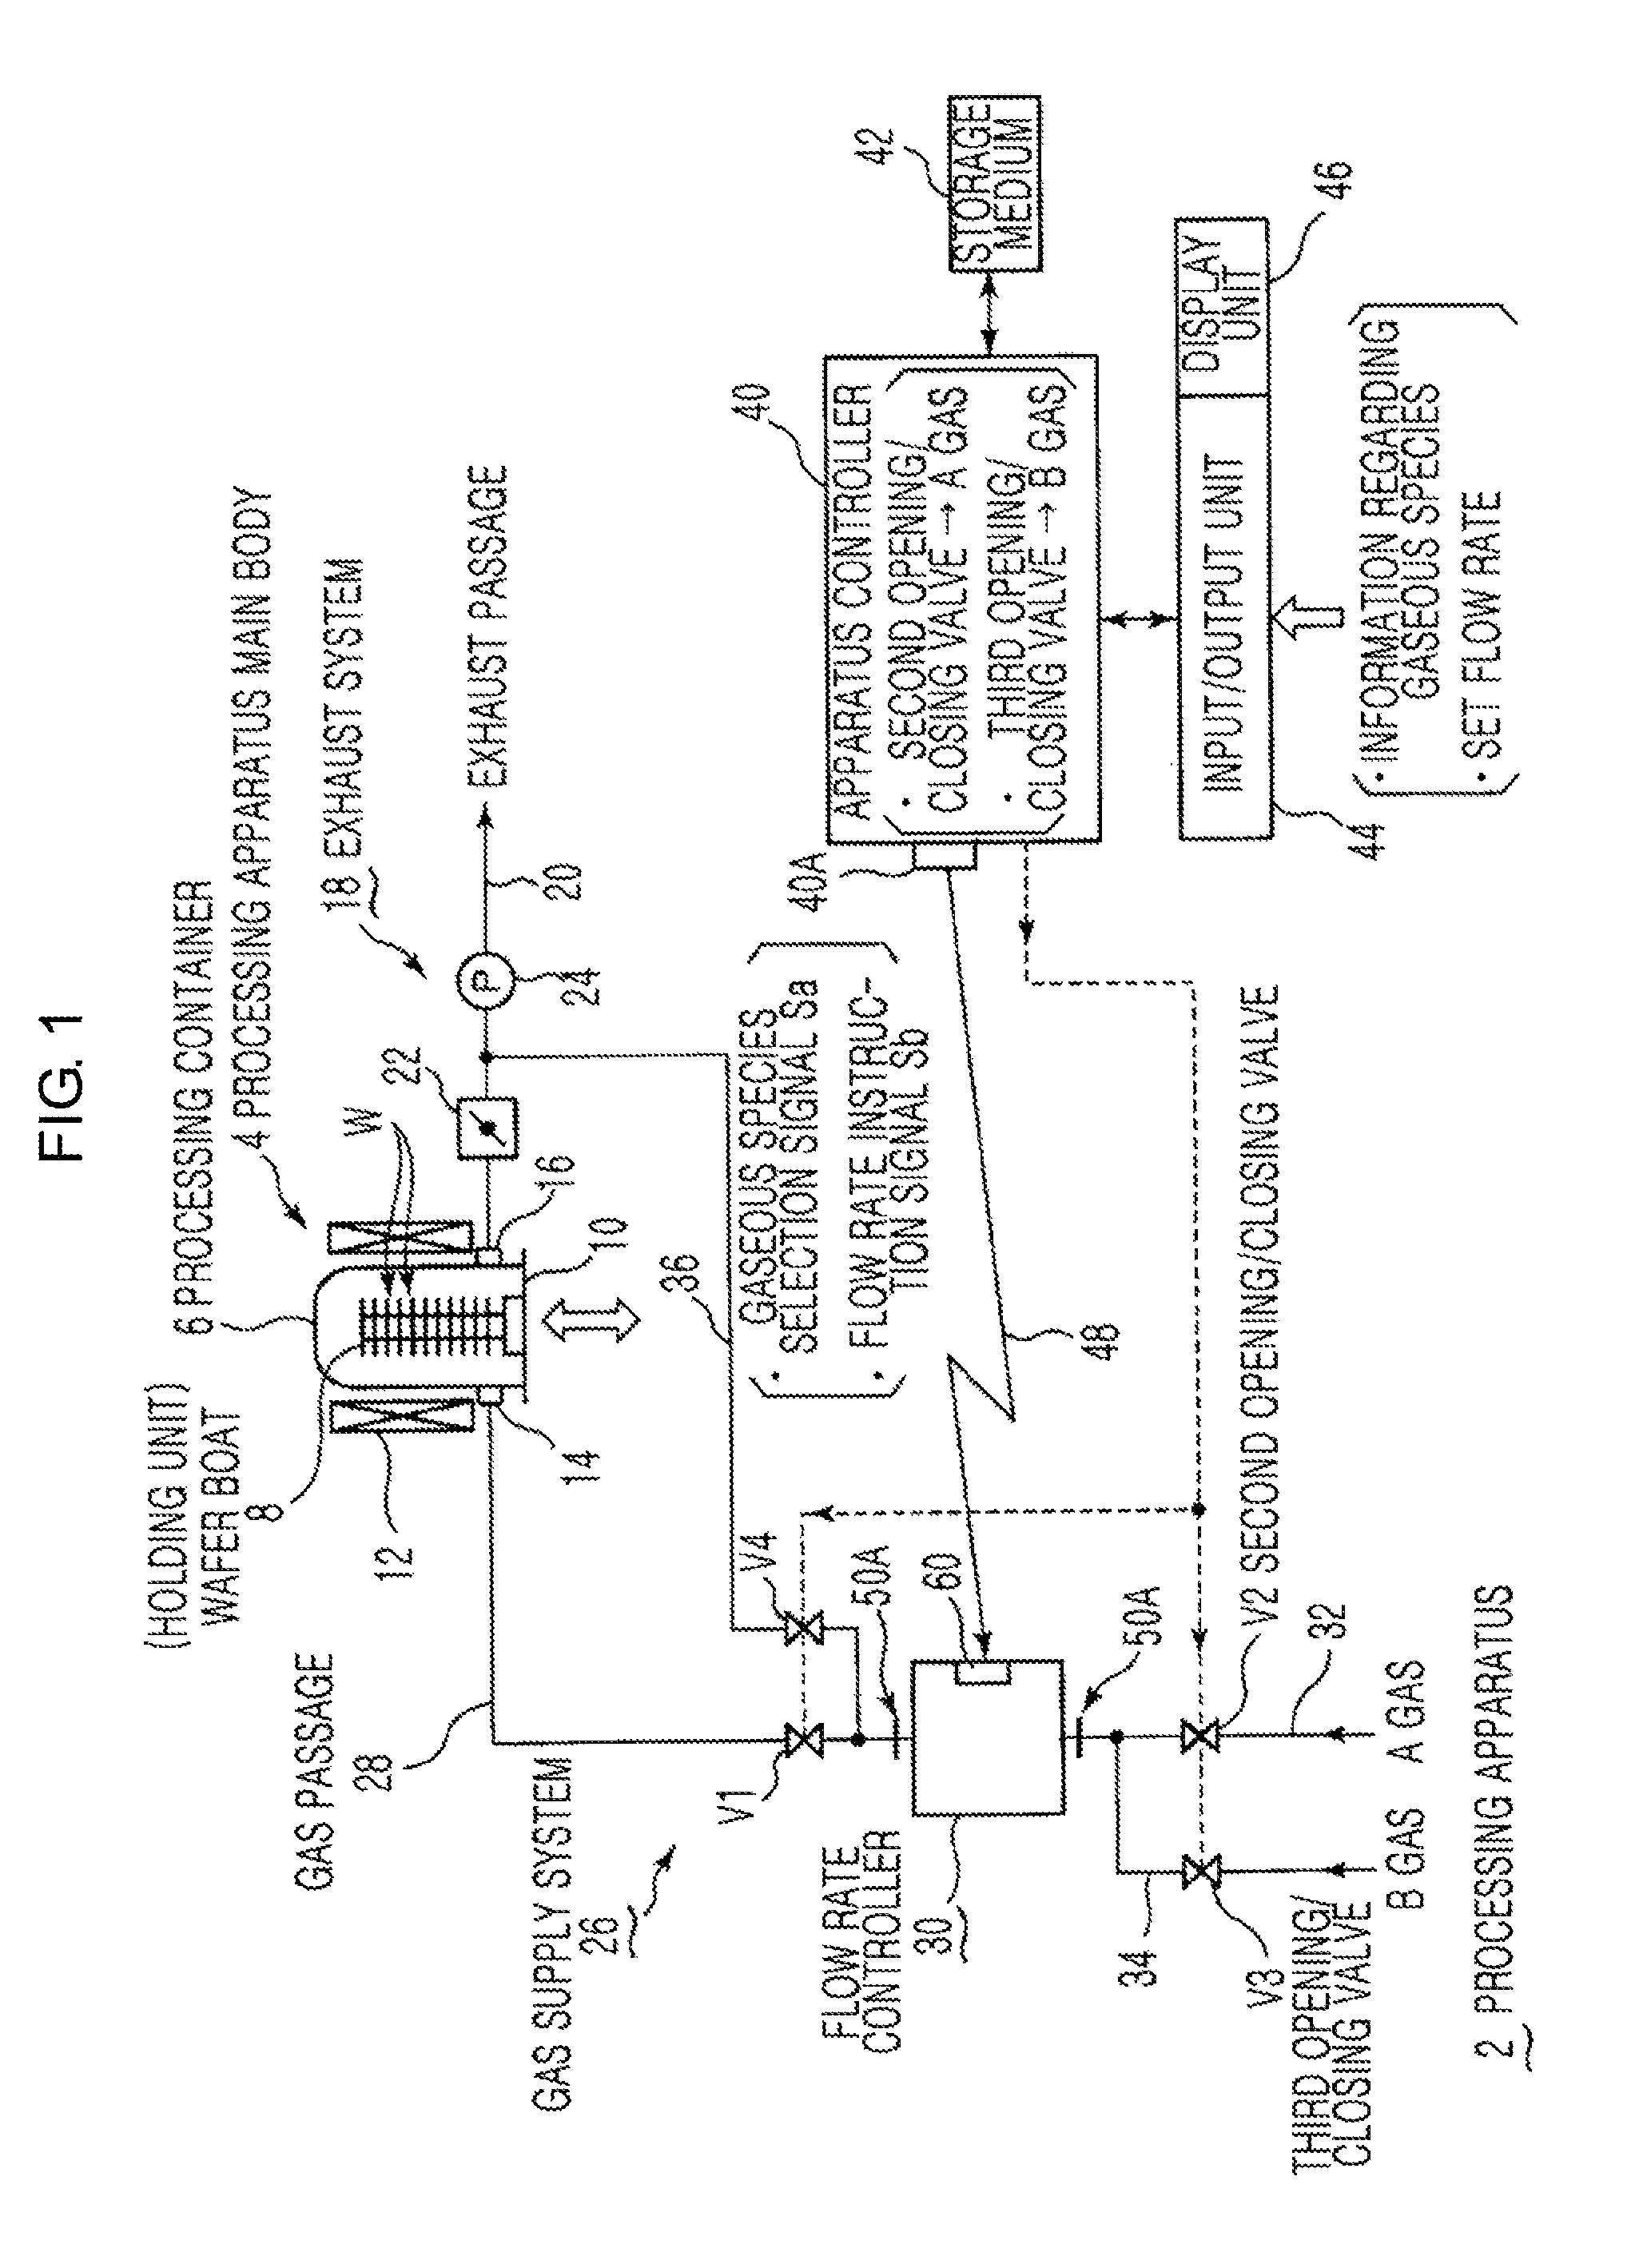 Flow rate controller and processing apparatus